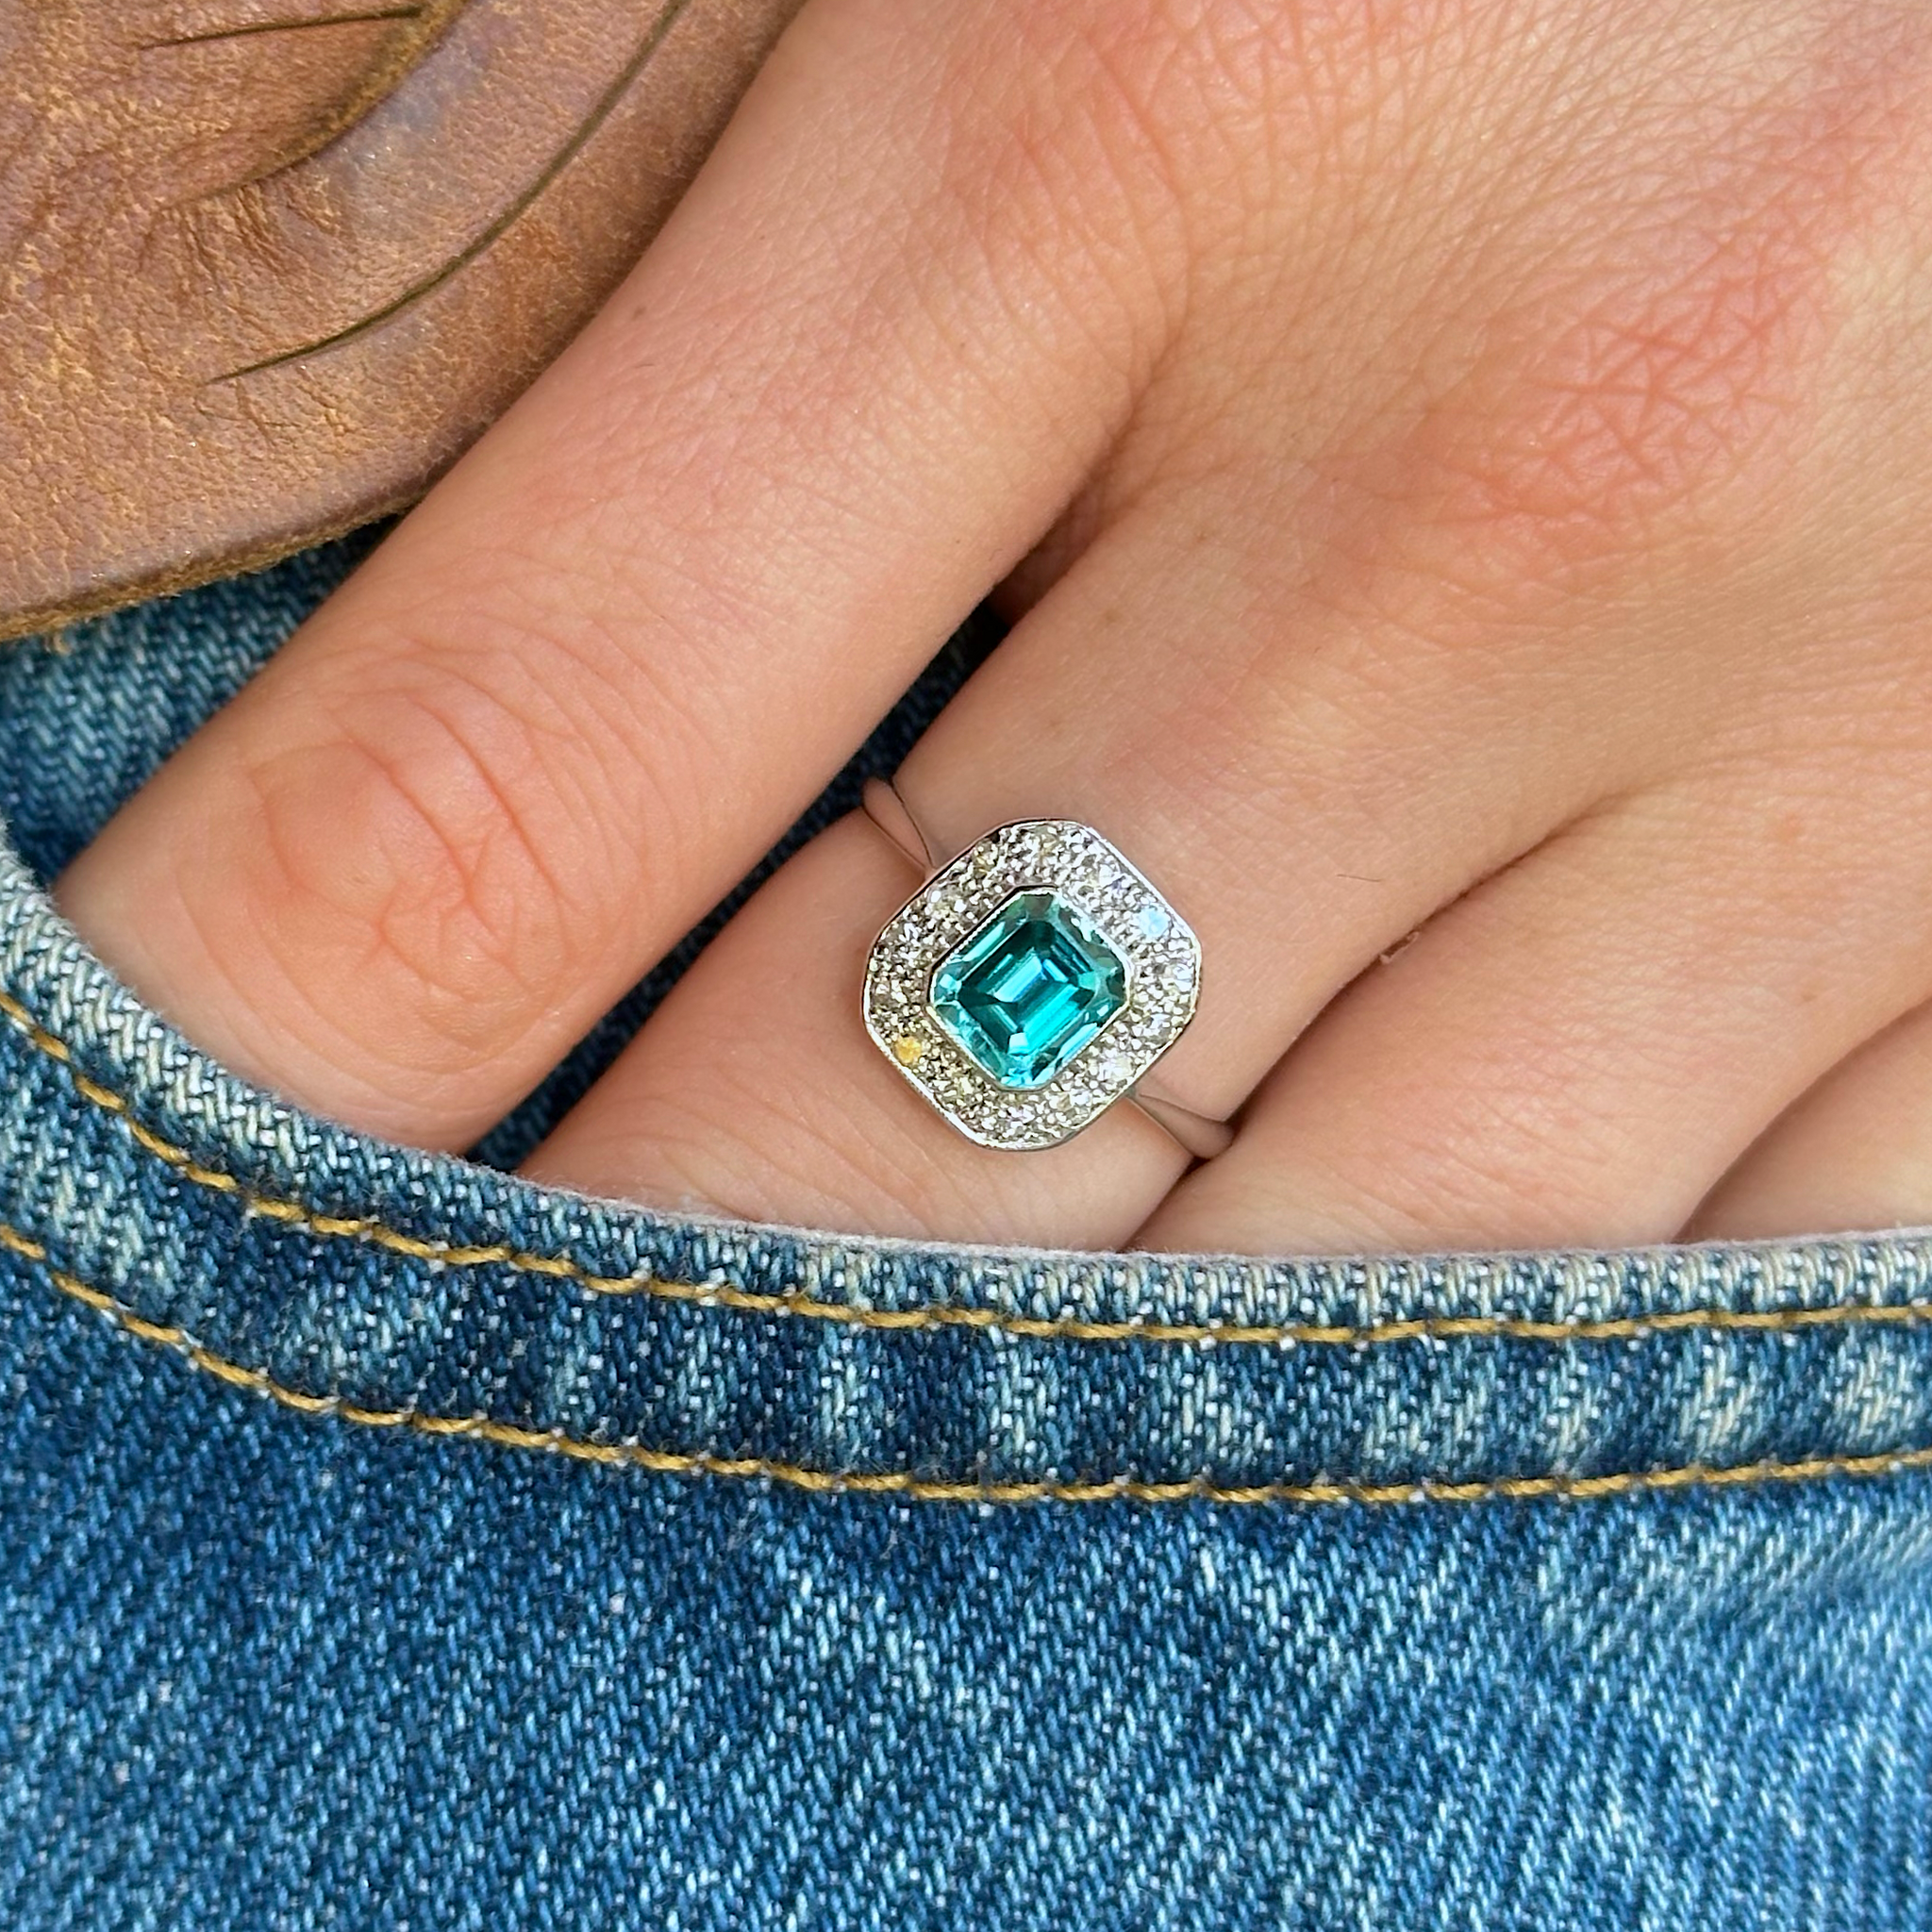 Vintage, Art Deco Natural Zircon and Diamond Cluster Ring, White Gold worn on hand in pocket of jeans